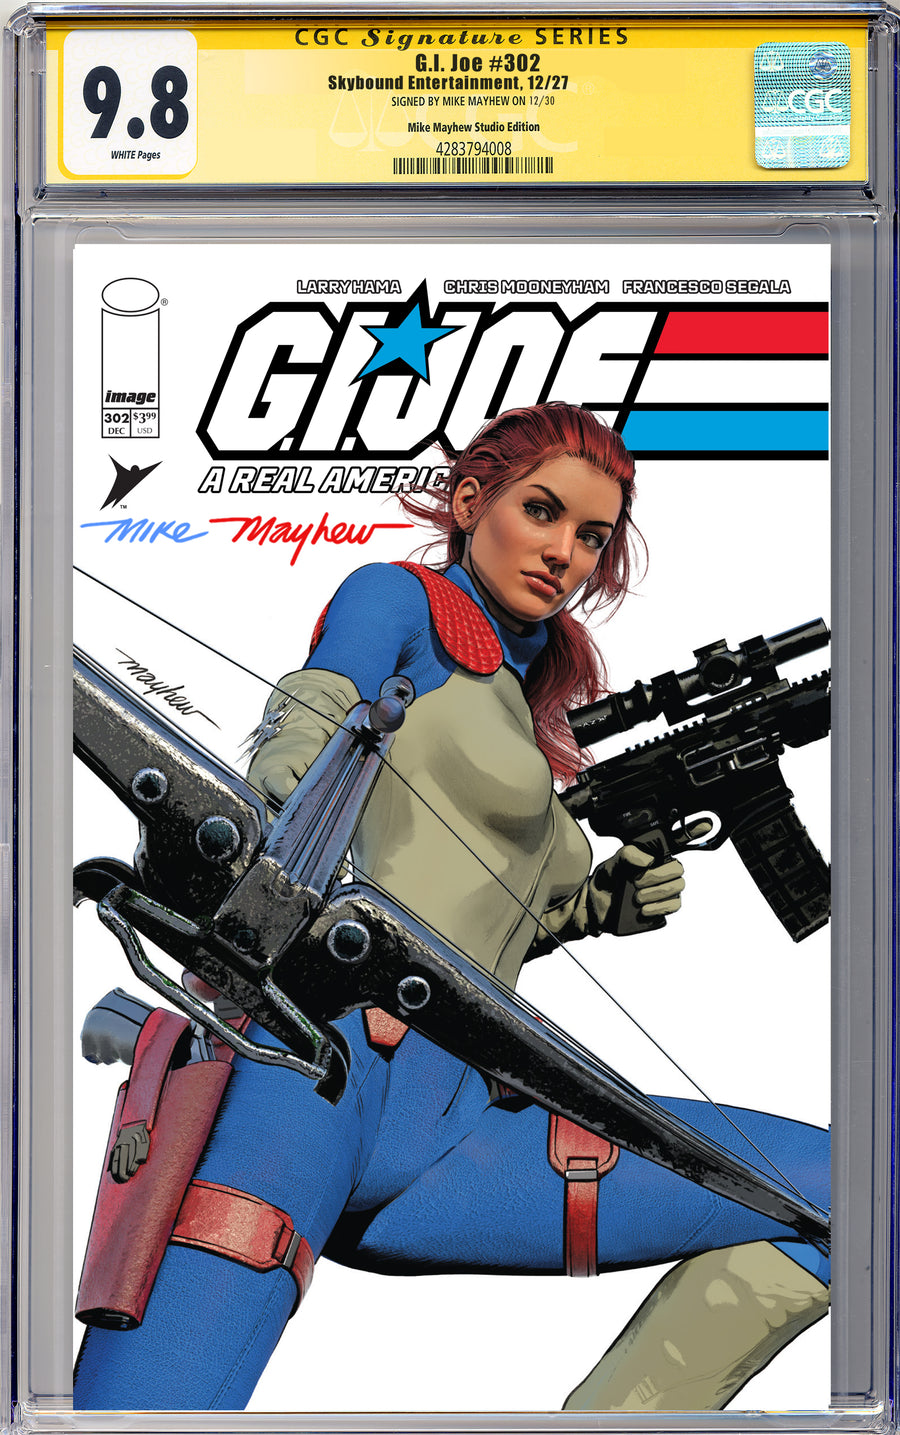 G.I. JOE: A REAL AMERICAN HERO #302 Mike Mayhew Studio Variant Cover A Trade Dress Full Duo Sig CGC Yellow Label 9.6 and Above Graded Slab